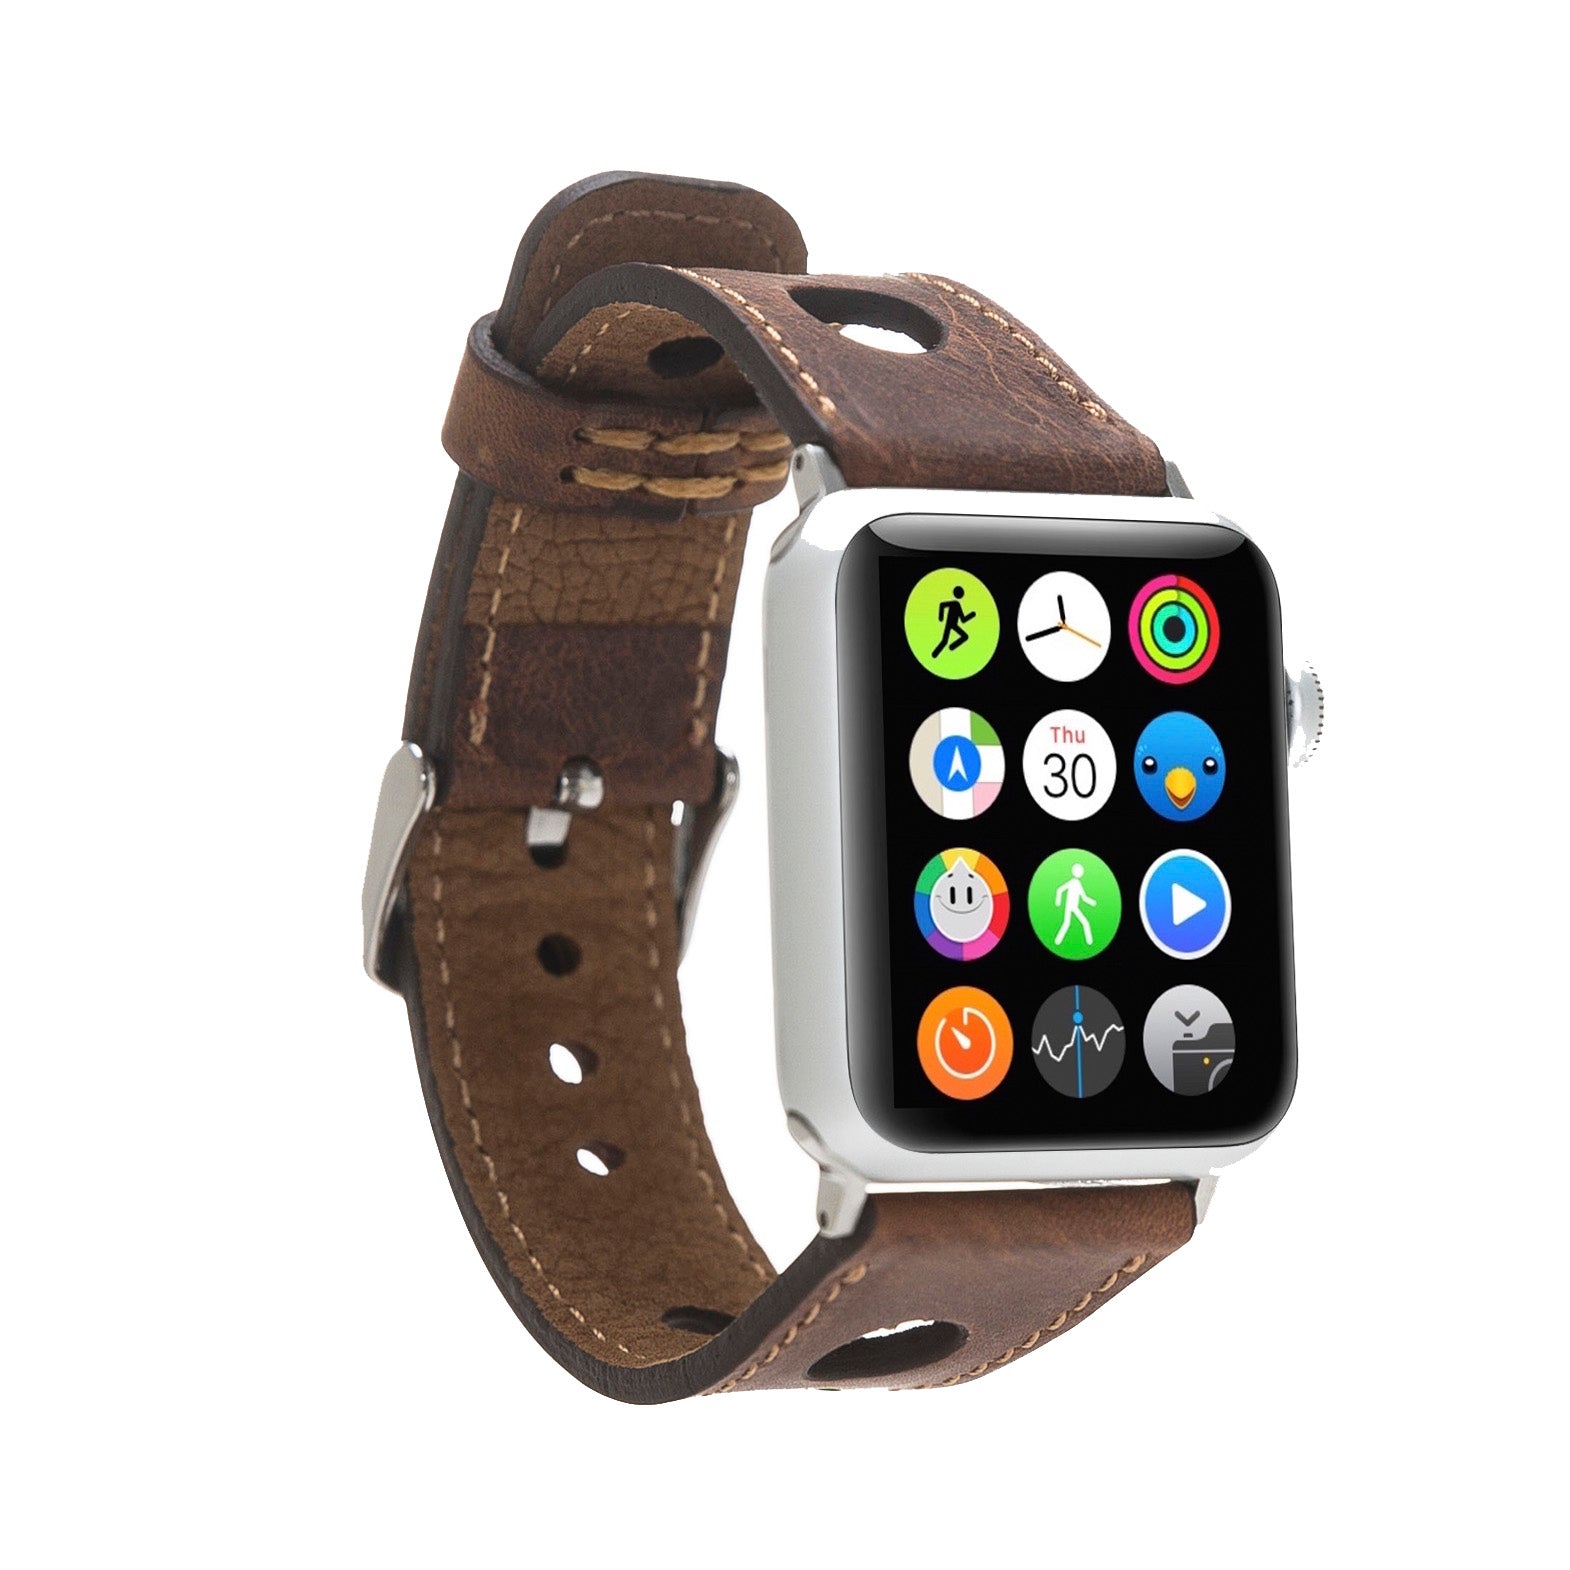 Holo Strap: Full Grain Leather Band for Apple Watch 38mm / 40mm - BROWN - saracleather